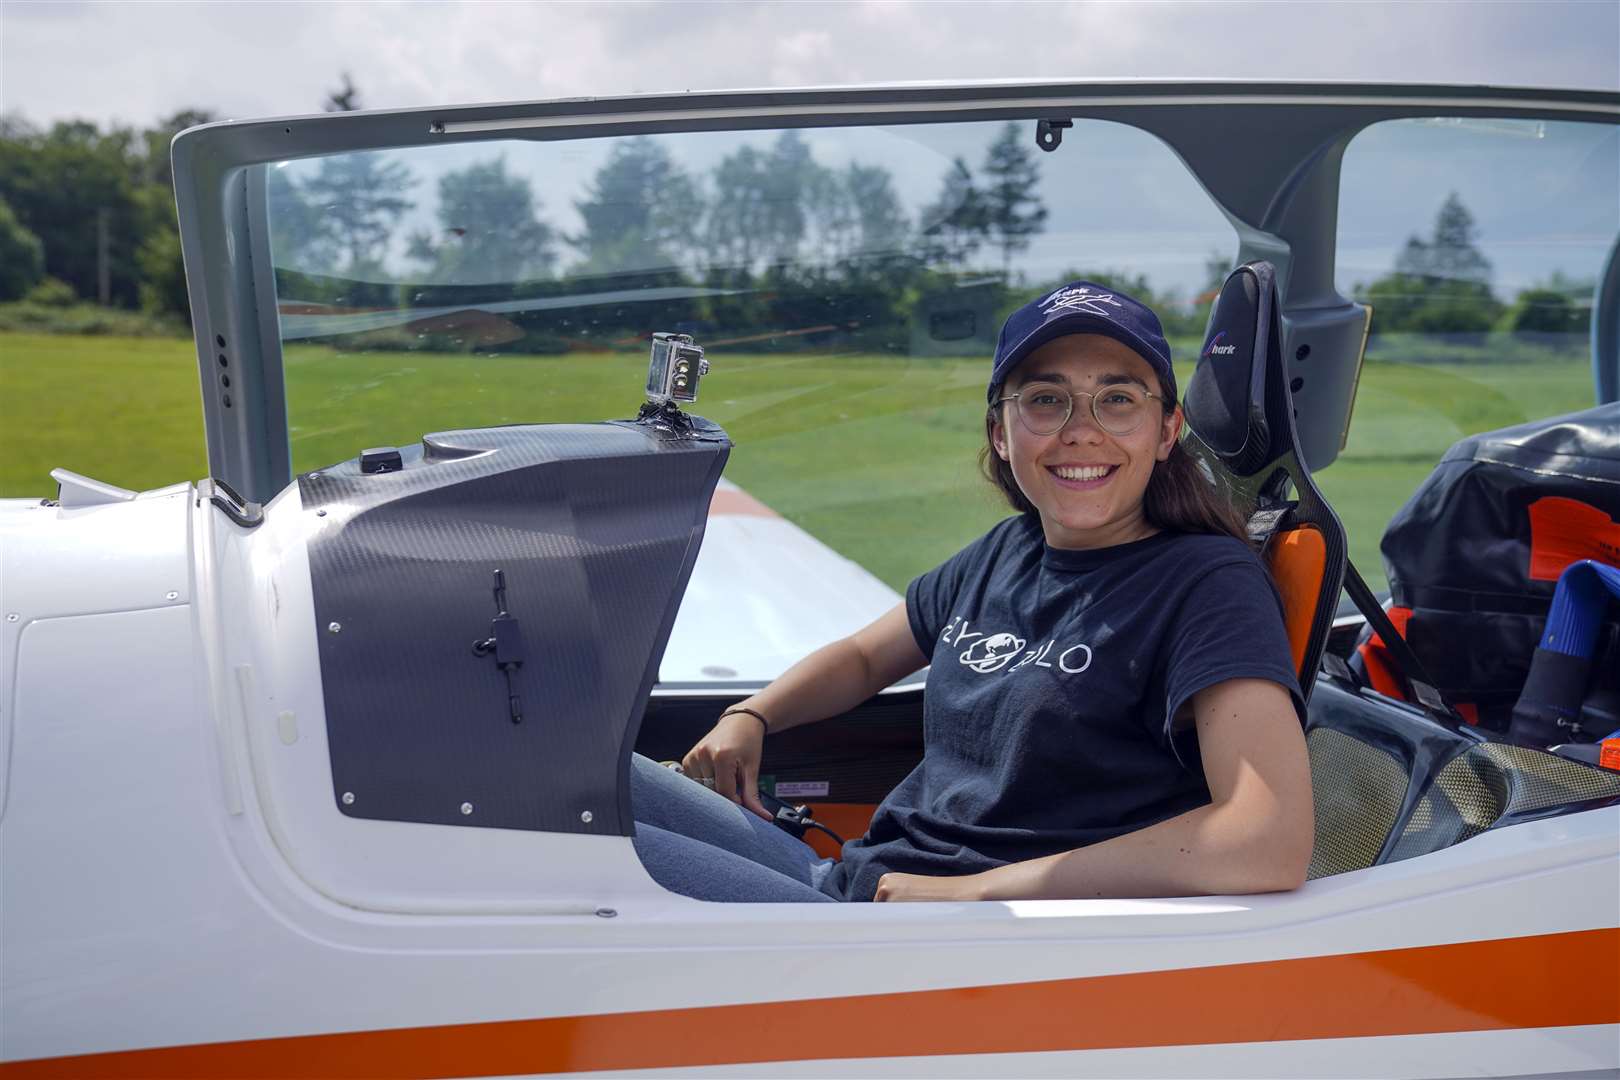 Zara Rutherford will attempt to set a new record and become the youngest woman to fly around the world solo in a small plane (Steve Parsons/PA)